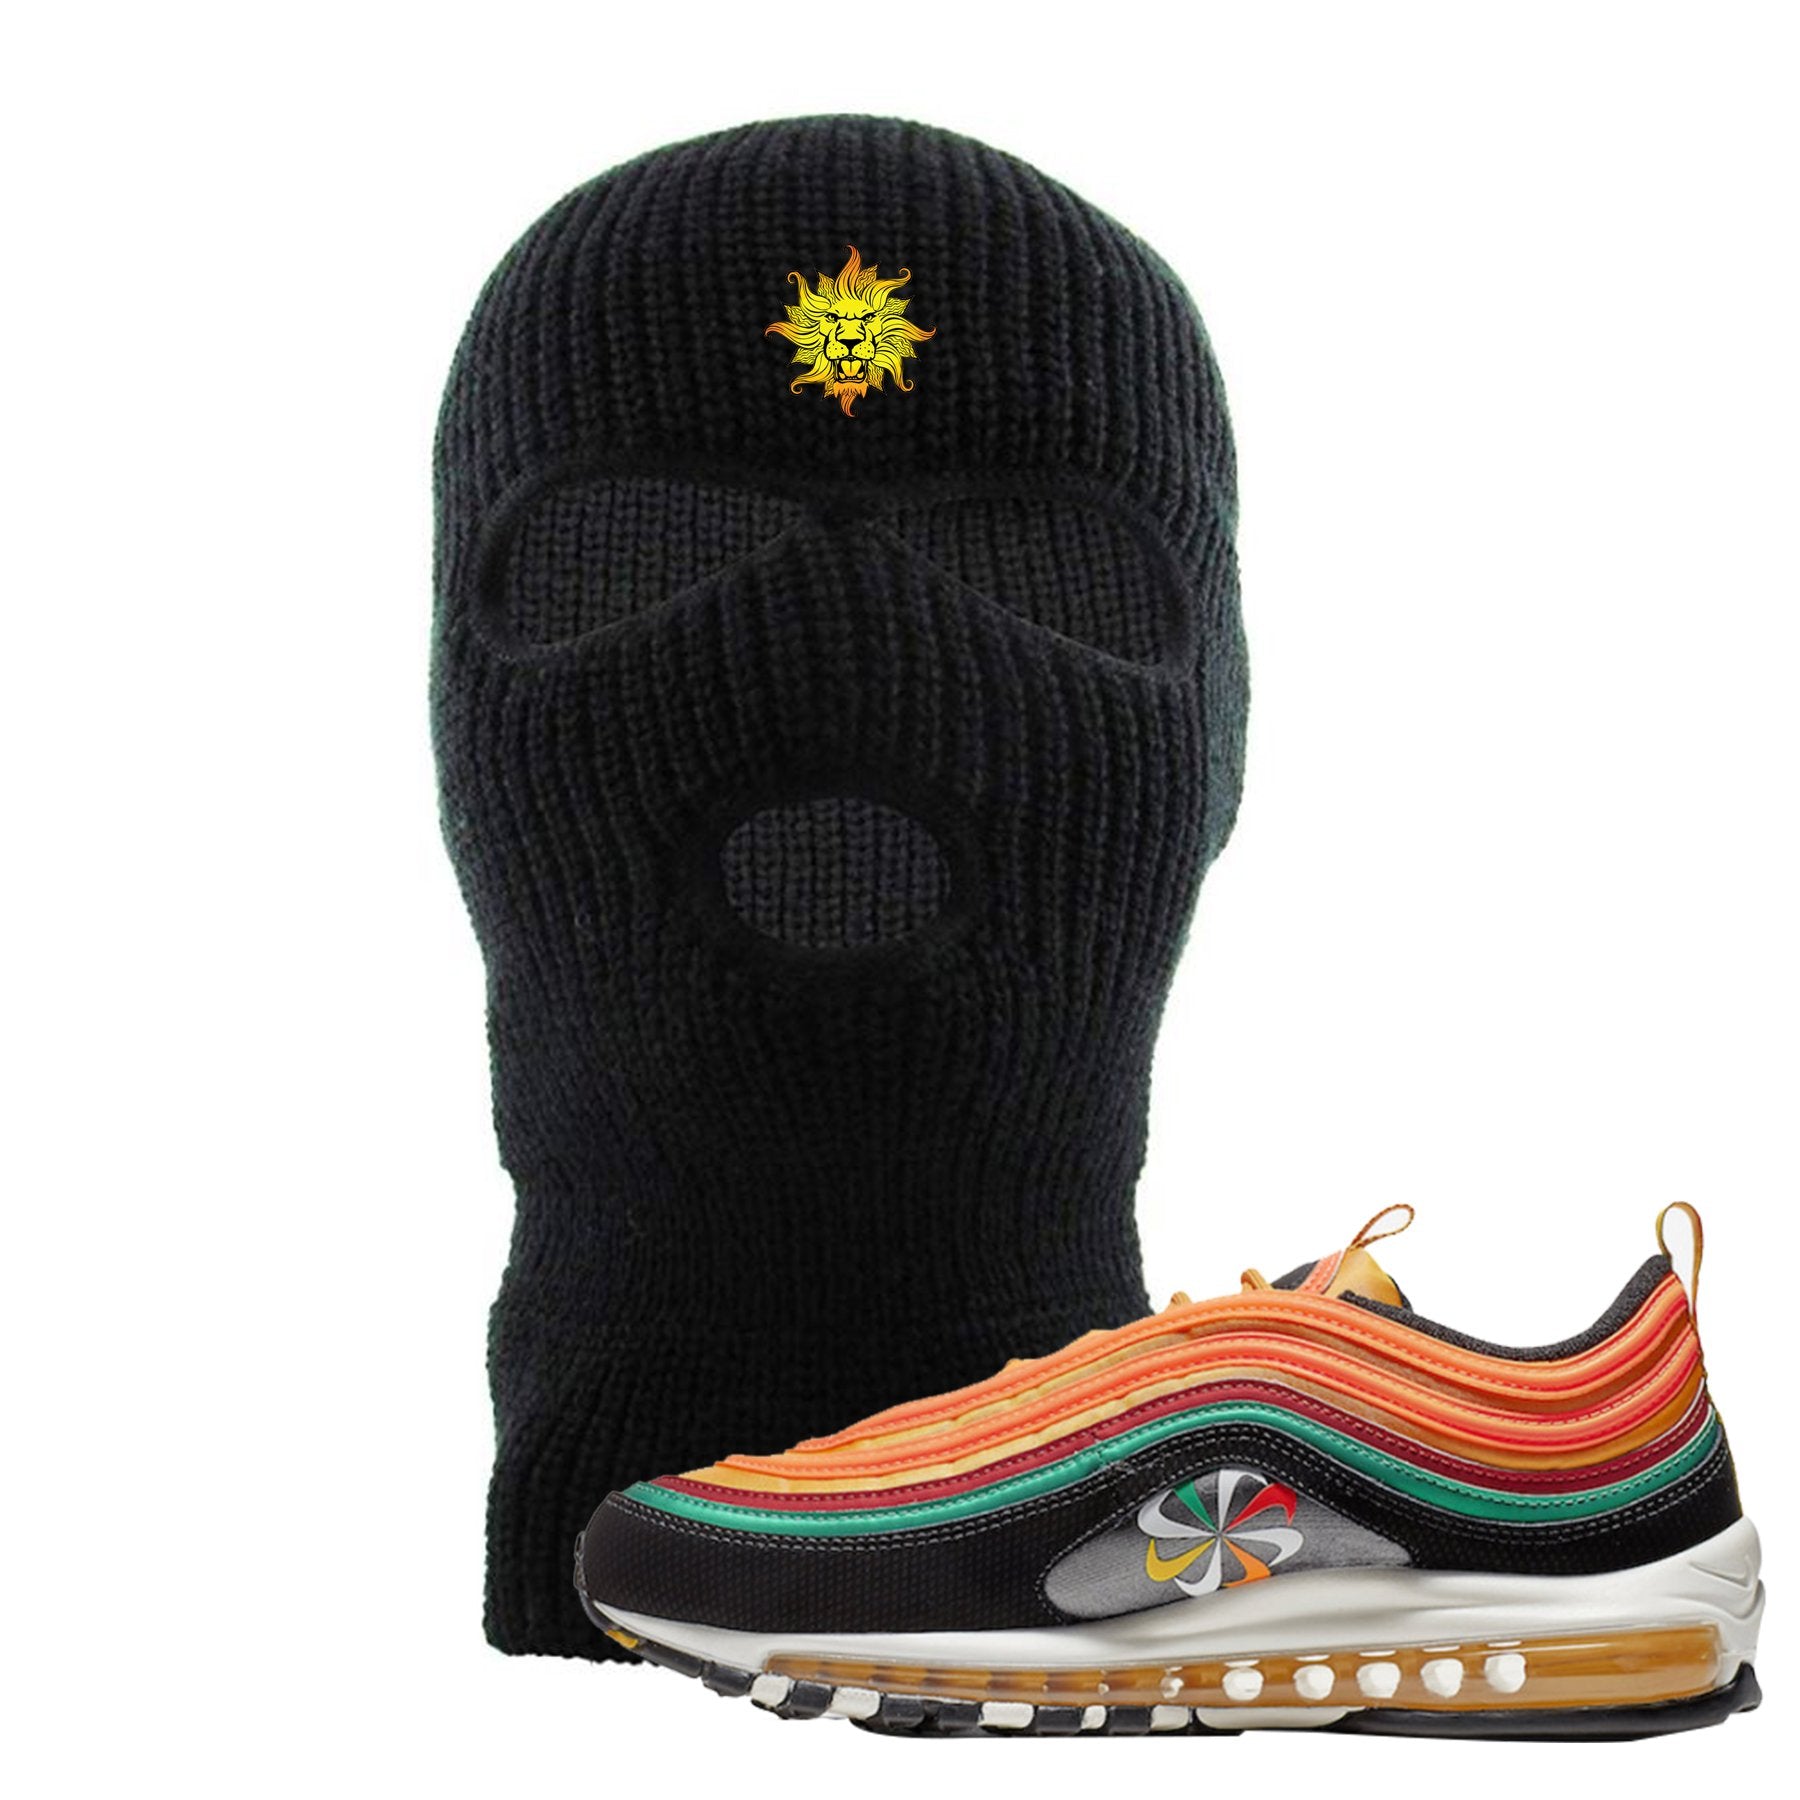 Embroidered on the forehead of the Air Max 97 Sunburst black sneaker matching ski mask is the Vintage Lion Head logo